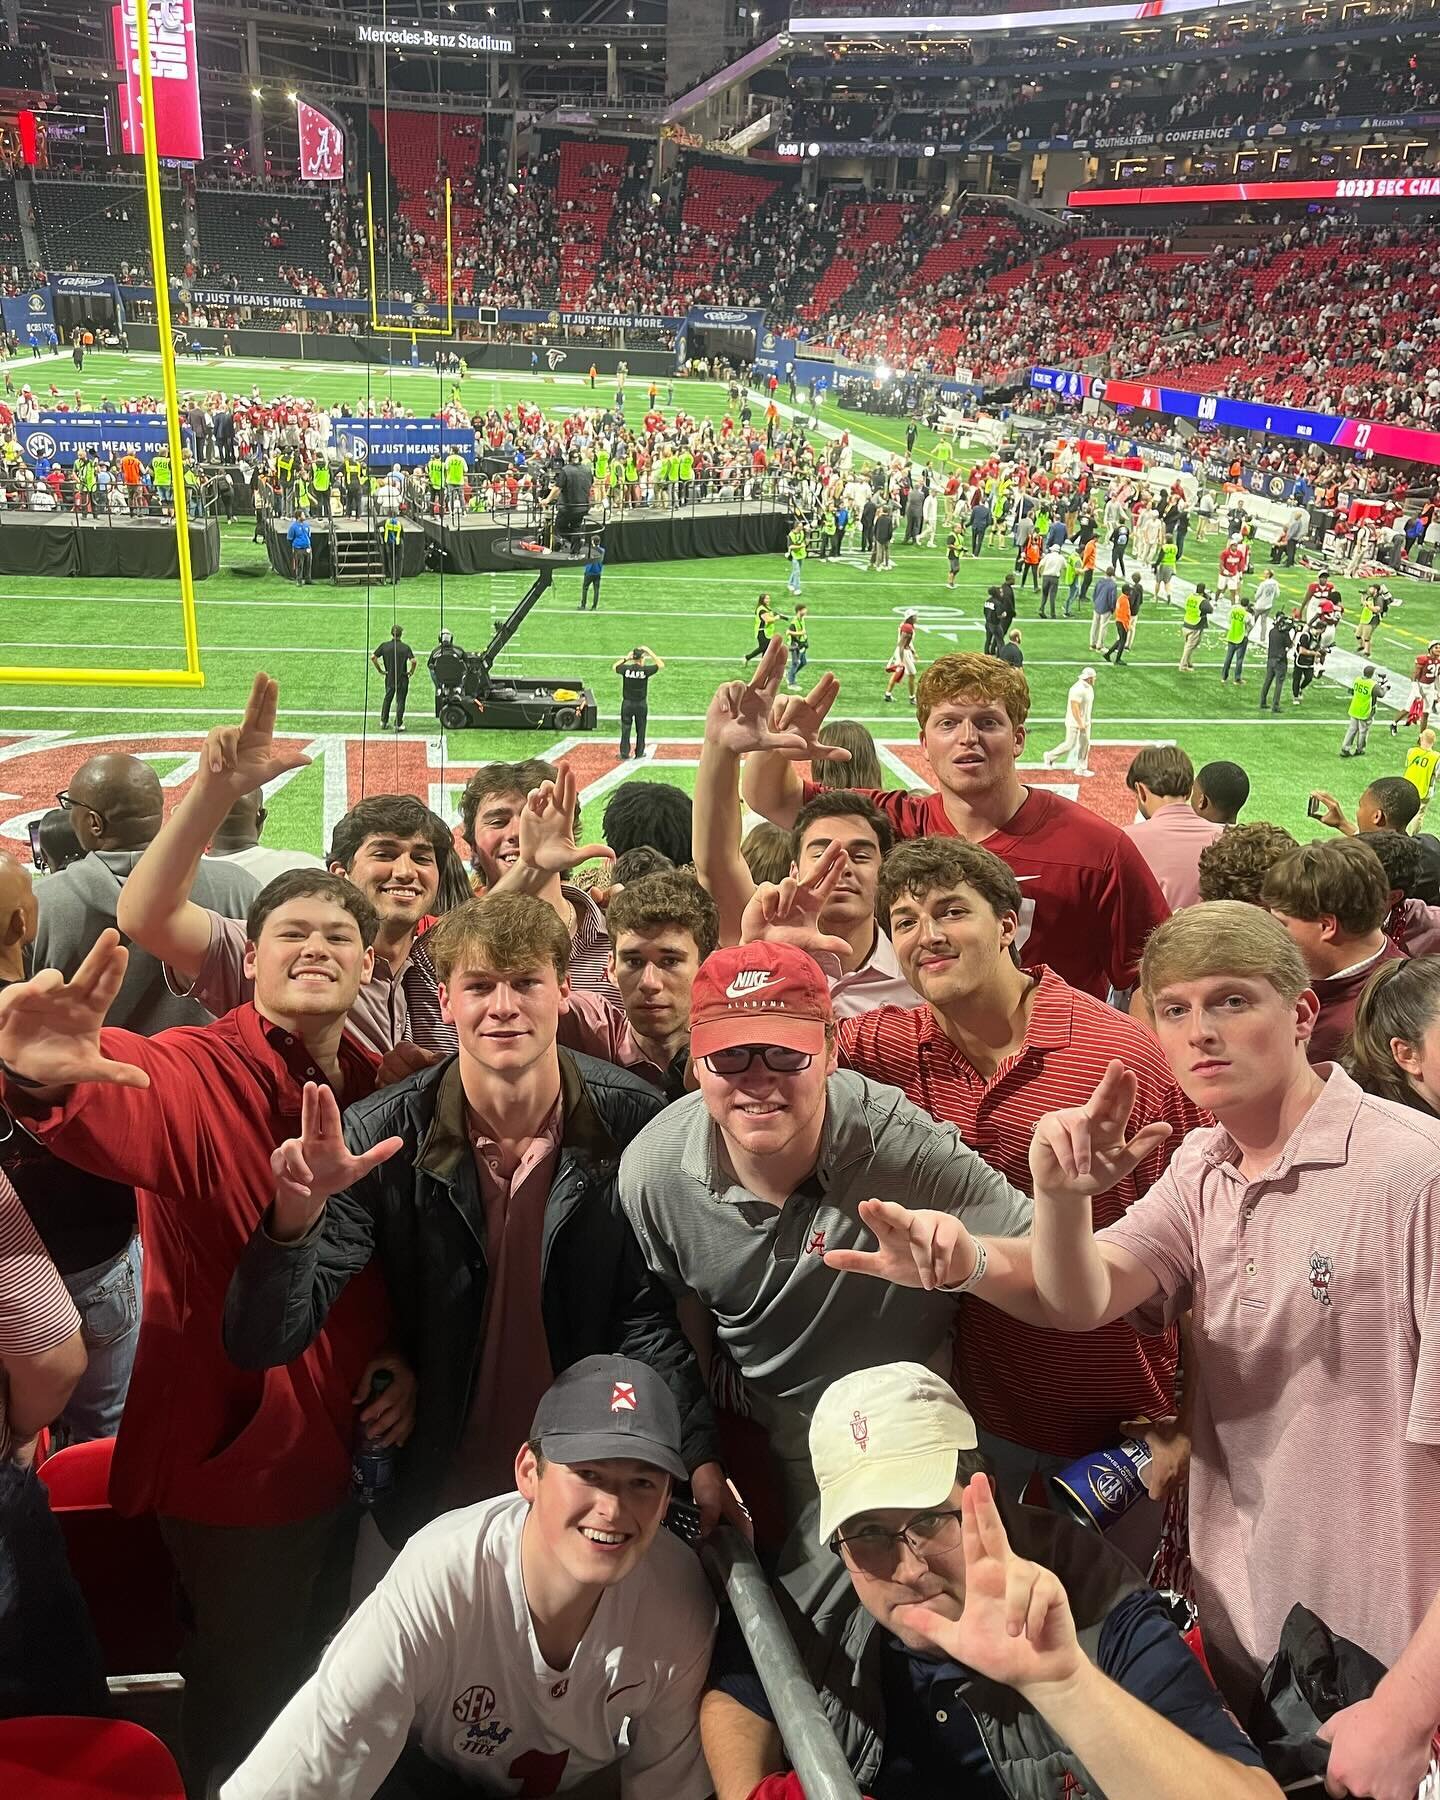 Our brothers had an amazing time at the SEC Championship Game in Atlanta this weekend. Onto the next. #LANK #beatgeorgia #jobnotfinished